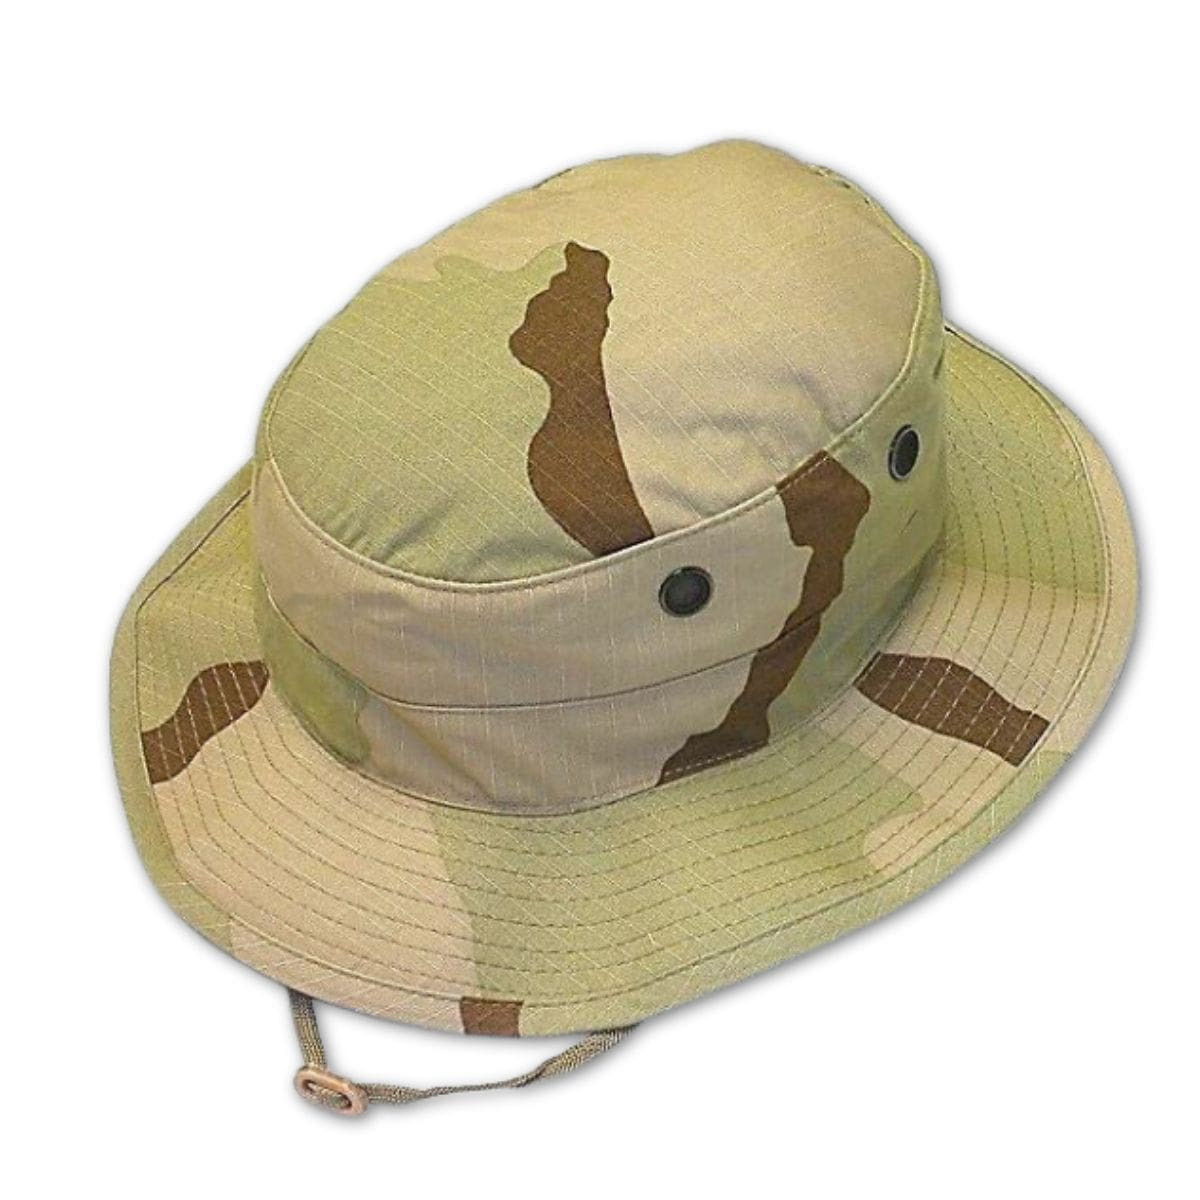 Image of NEW U.S. Issue Desert Camo Boonie Hat, Nyco Rip-Stop